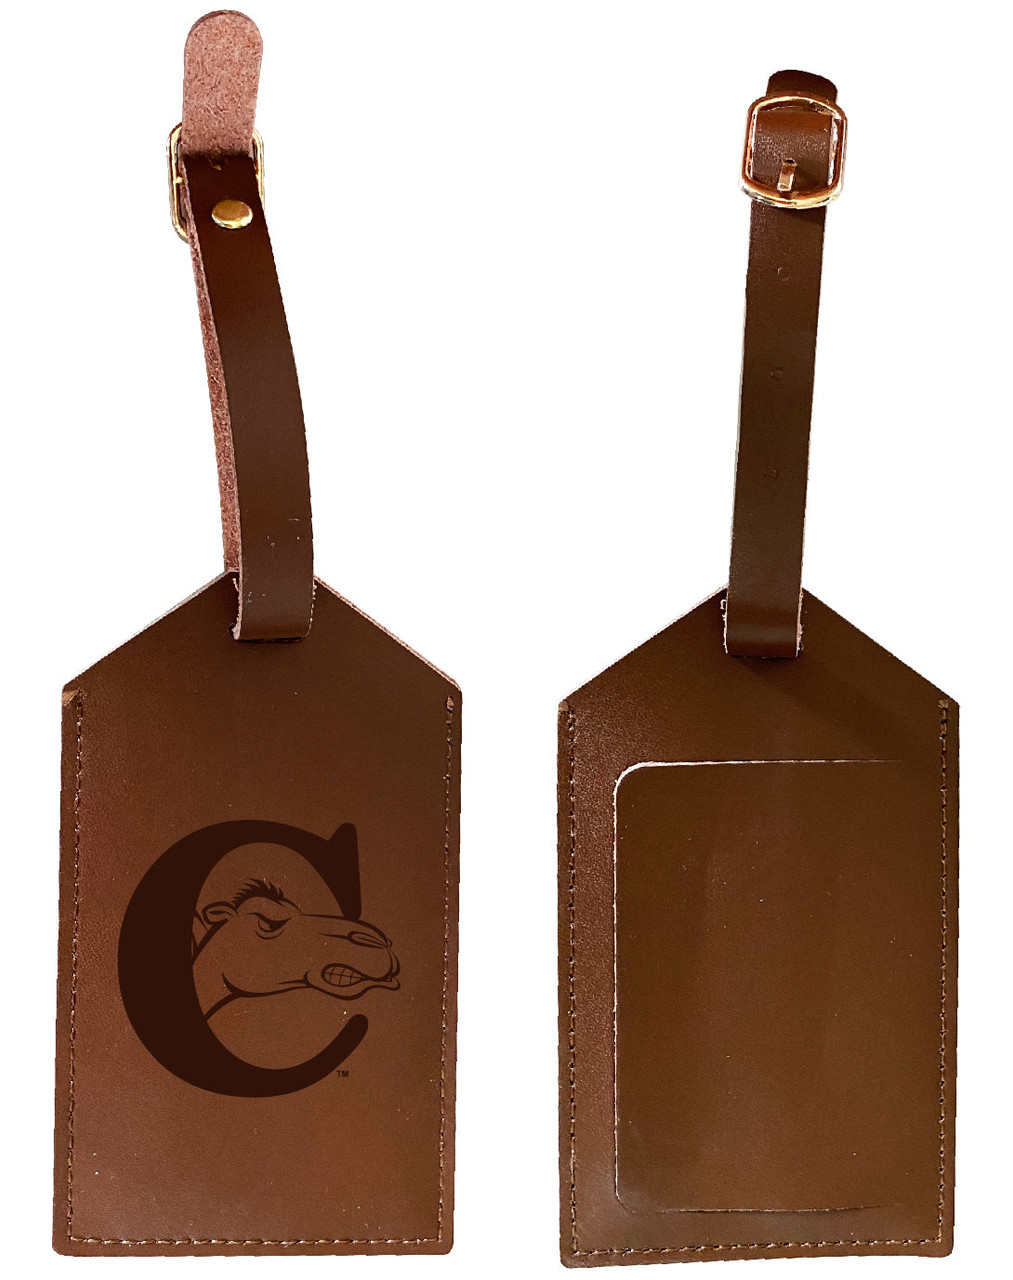 Campbell University Fighting Camels Leather Luggage Tag Engraved